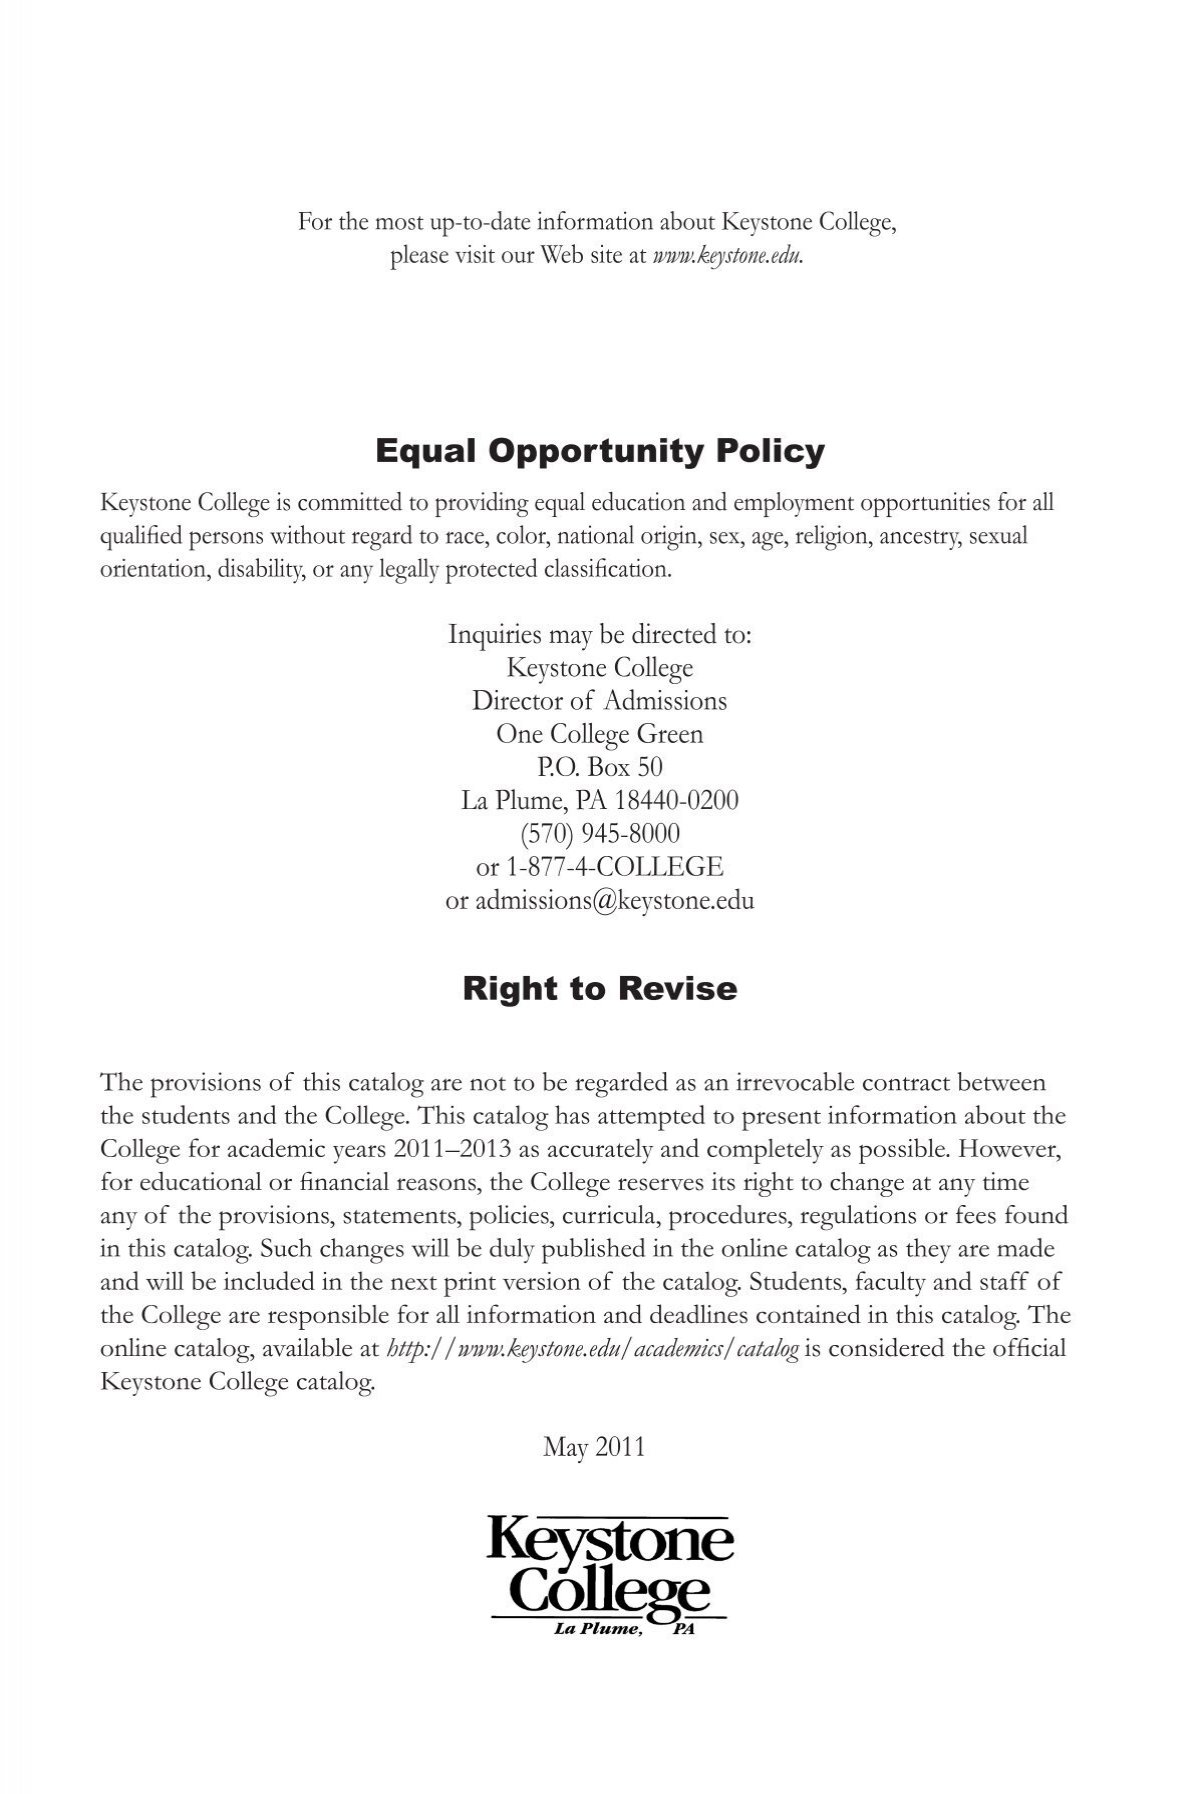 Right to Revise Equal Opportunity Policy